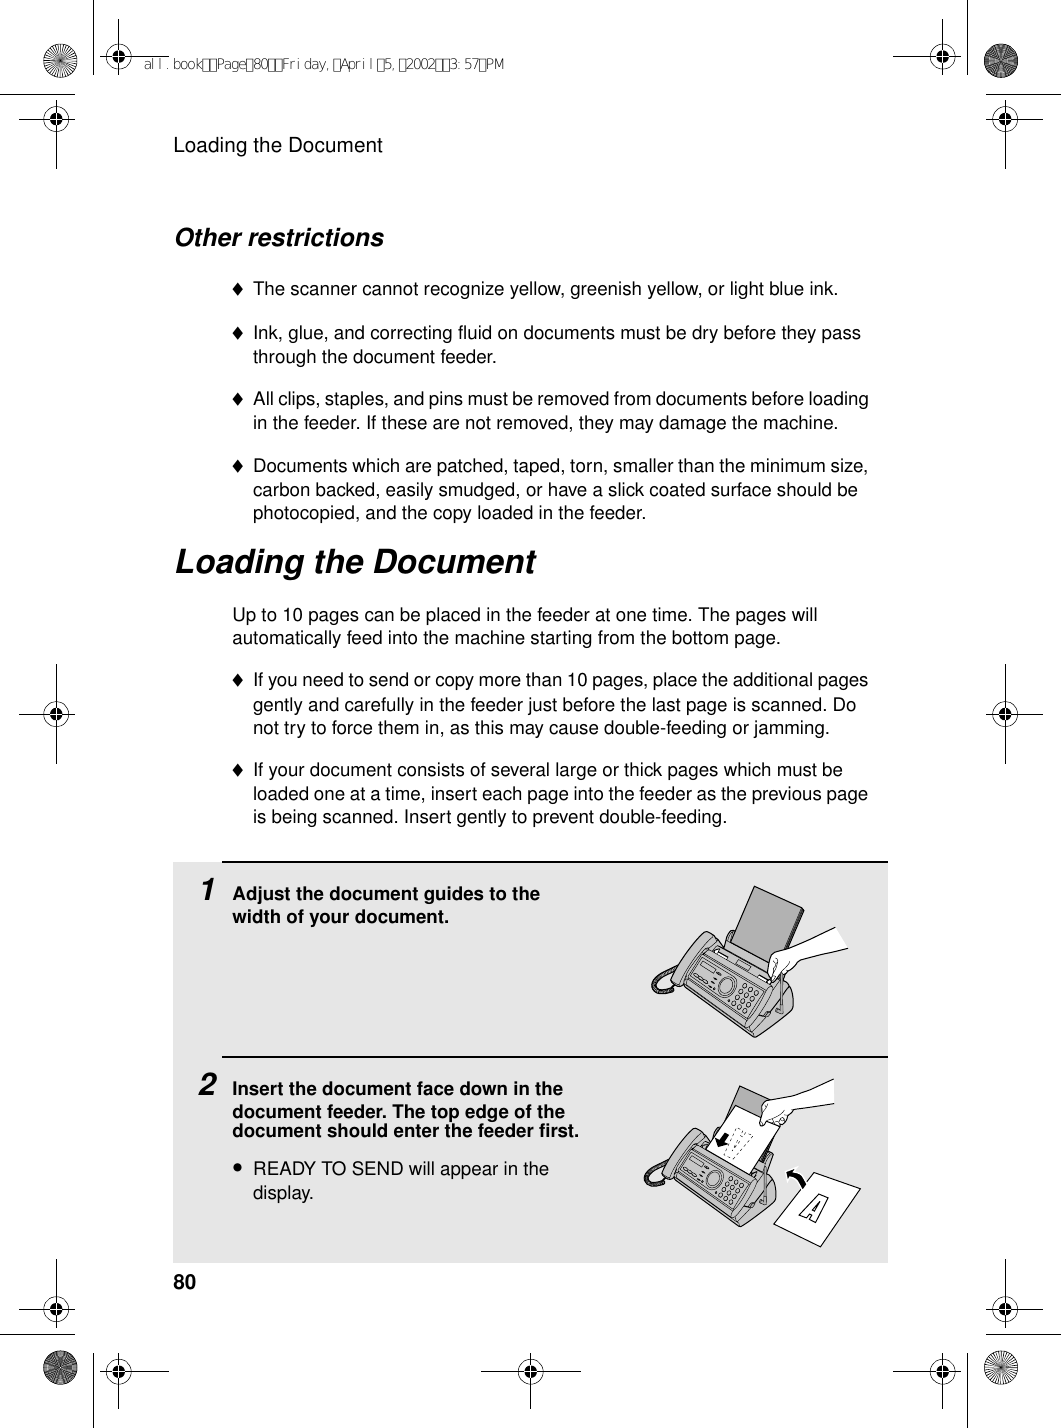 Loading the Document80Other restrictions♦The scanner cannot recognize yellow, greenish yellow, or light blue ink.♦Ink, glue, and correcting fluid on documents must be dry before they pass through the document feeder.♦All clips, staples, and pins must be removed from documents before loading in the feeder. If these are not removed, they may damage the machine.♦Documents which are patched, taped, torn, smaller than the minimum size, carbon backed, easily smudged, or have a slick coated surface should be photocopied, and the copy loaded in the feeder.Loading the DocumentUp to 10 pages can be placed in the feeder at one time. The pages will automatically feed into the machine starting from the bottom page.♦If you need to send or copy more than 10 pages, place the additional pages gently and carefully in the feeder just before the last page is scanned. Do not try to force them in, as this may cause double-feeding or jamming.♦If your document consists of several large or thick pages which must be loaded one at a time, insert each page into the feeder as the previous page is being scanned. Insert gently to prevent double-feeding.1Adjust the document guides to the width of your document.2Insert the document face down in the document feeder. The top edge of the document should enter the feeder first.•READY TO SEND will appear in the display.all.bookPage80Friday,April5,20023:57PM